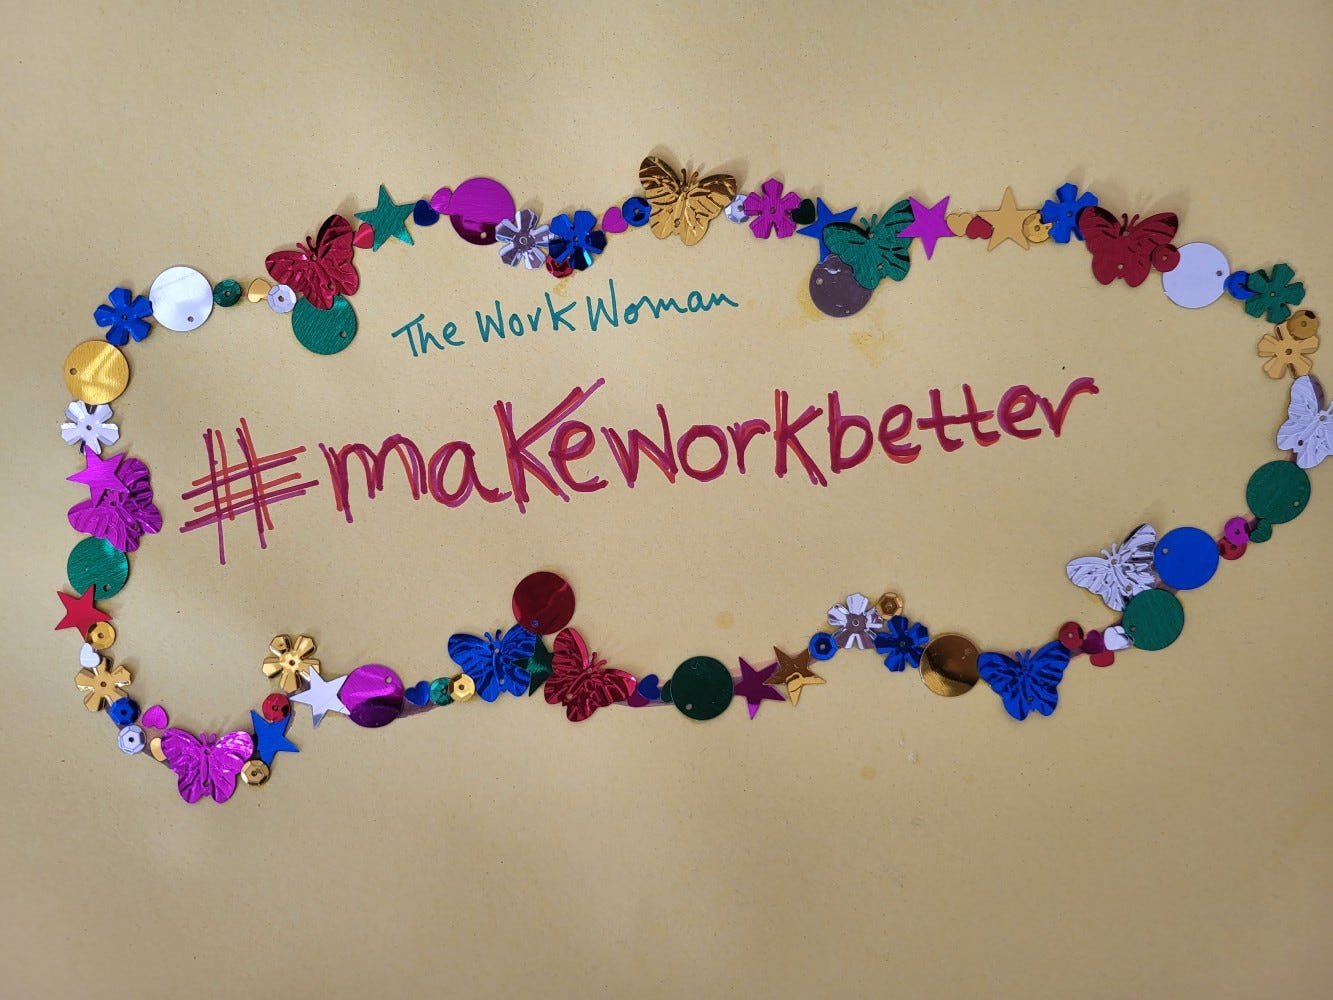 A squiggly sequin border surrounds the hashtag Make Work Better and above the hashtag are the words The Work Woman